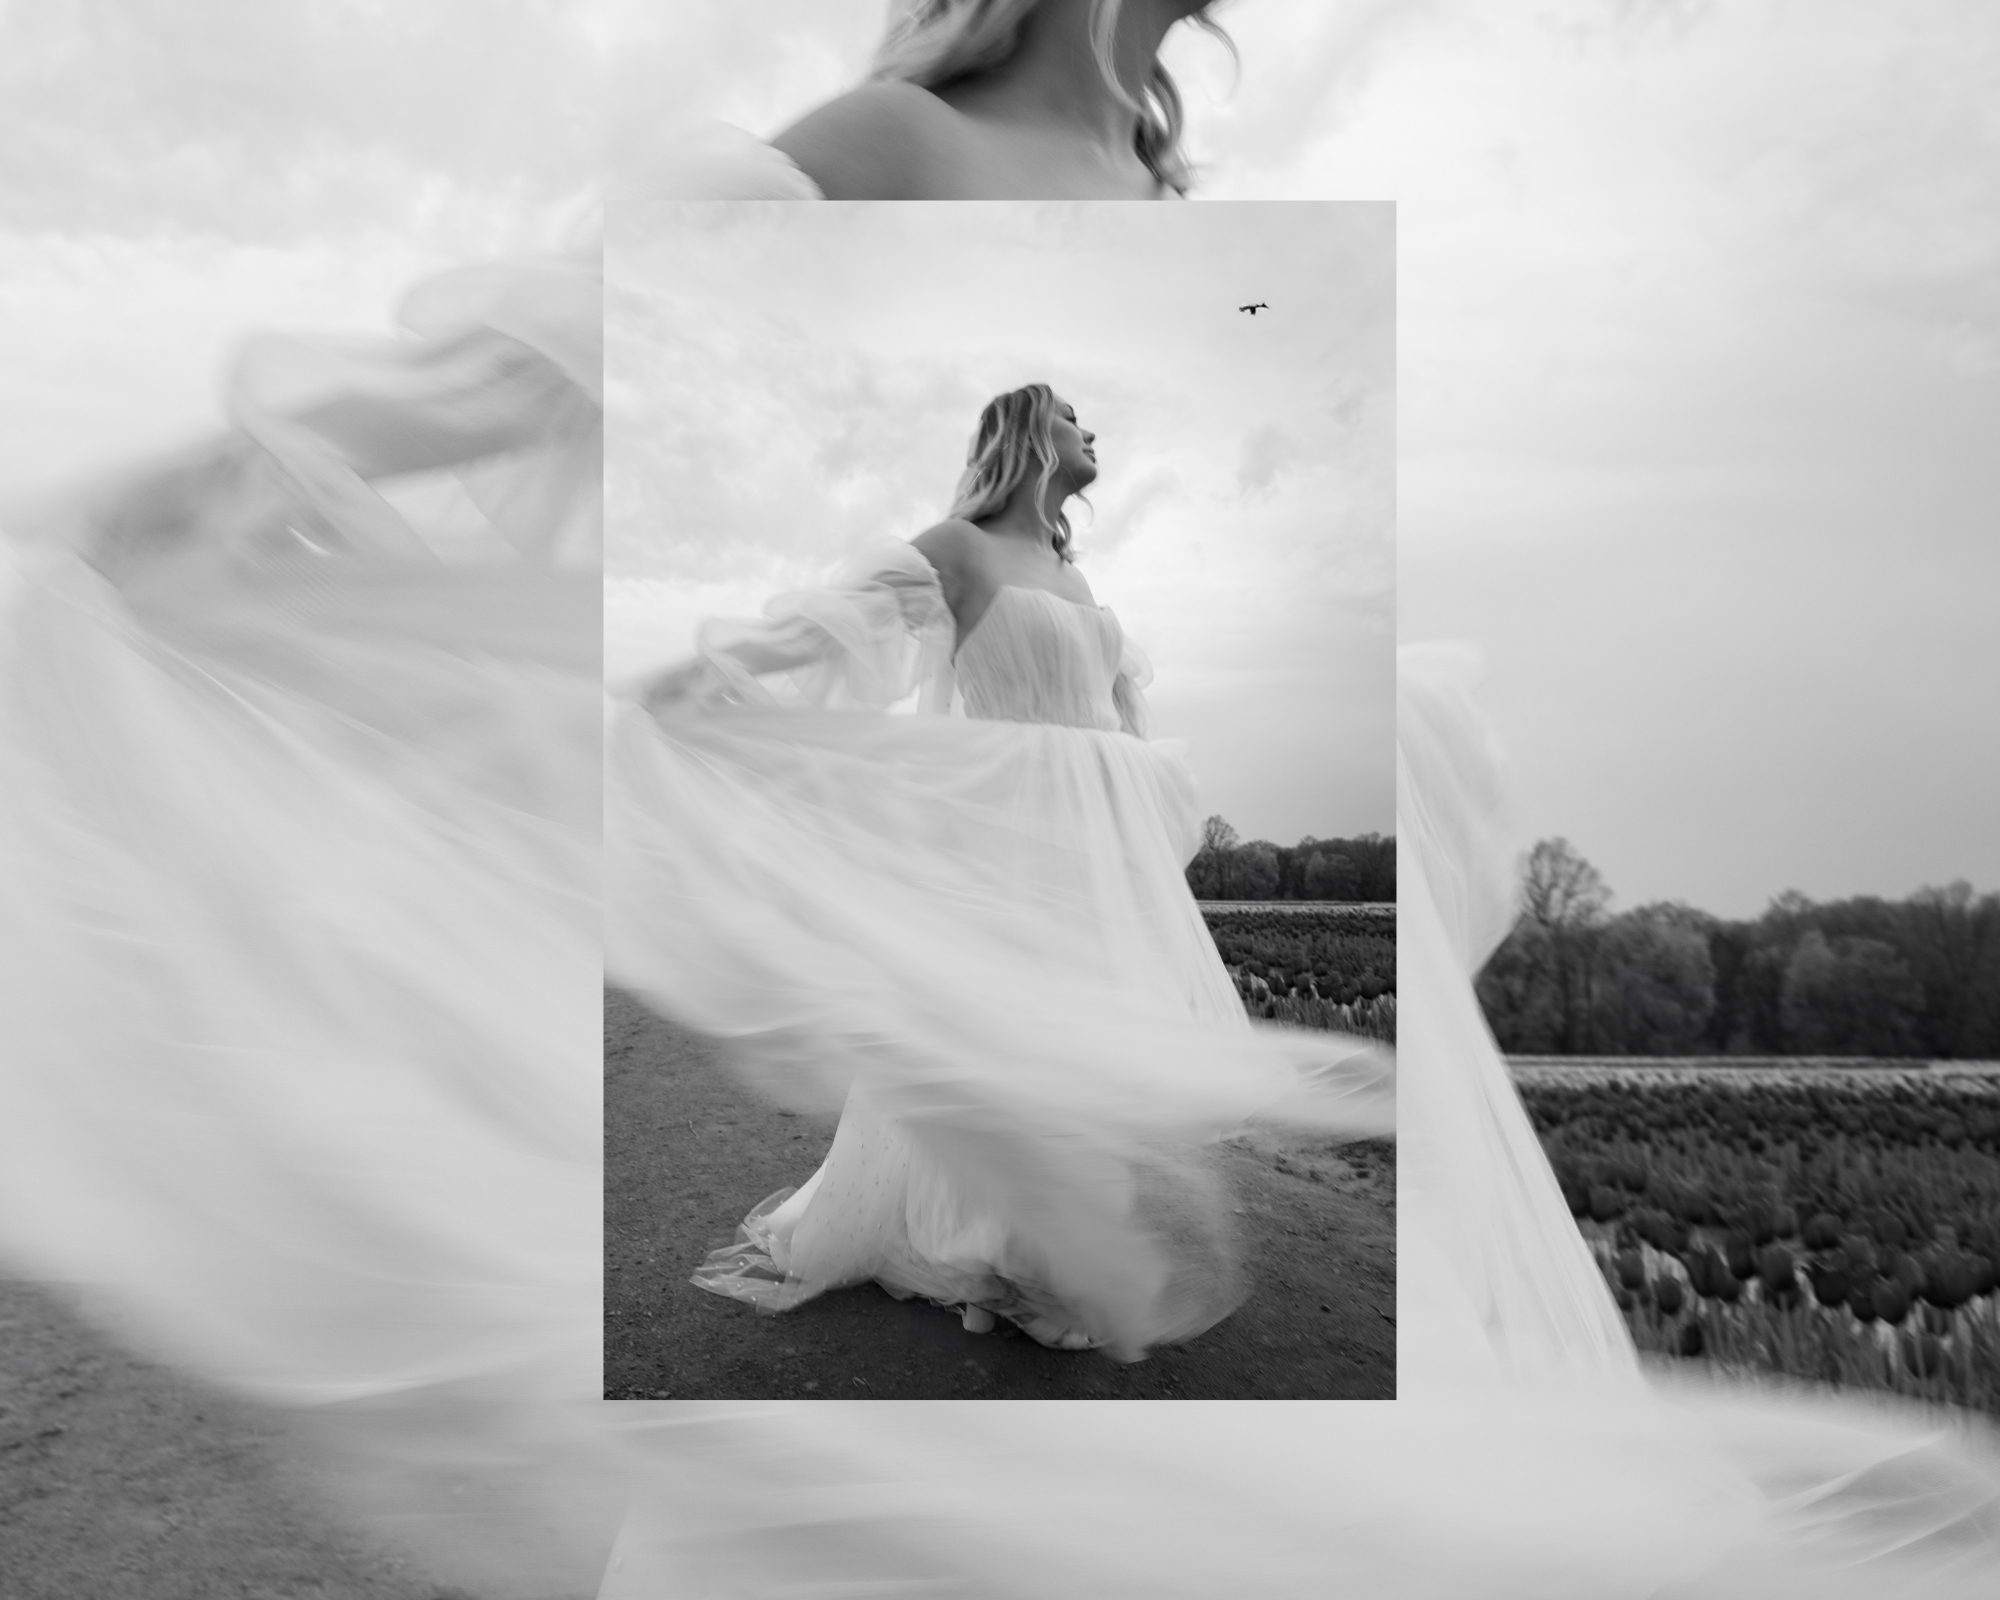 Stunning black and white motion photo of a bride